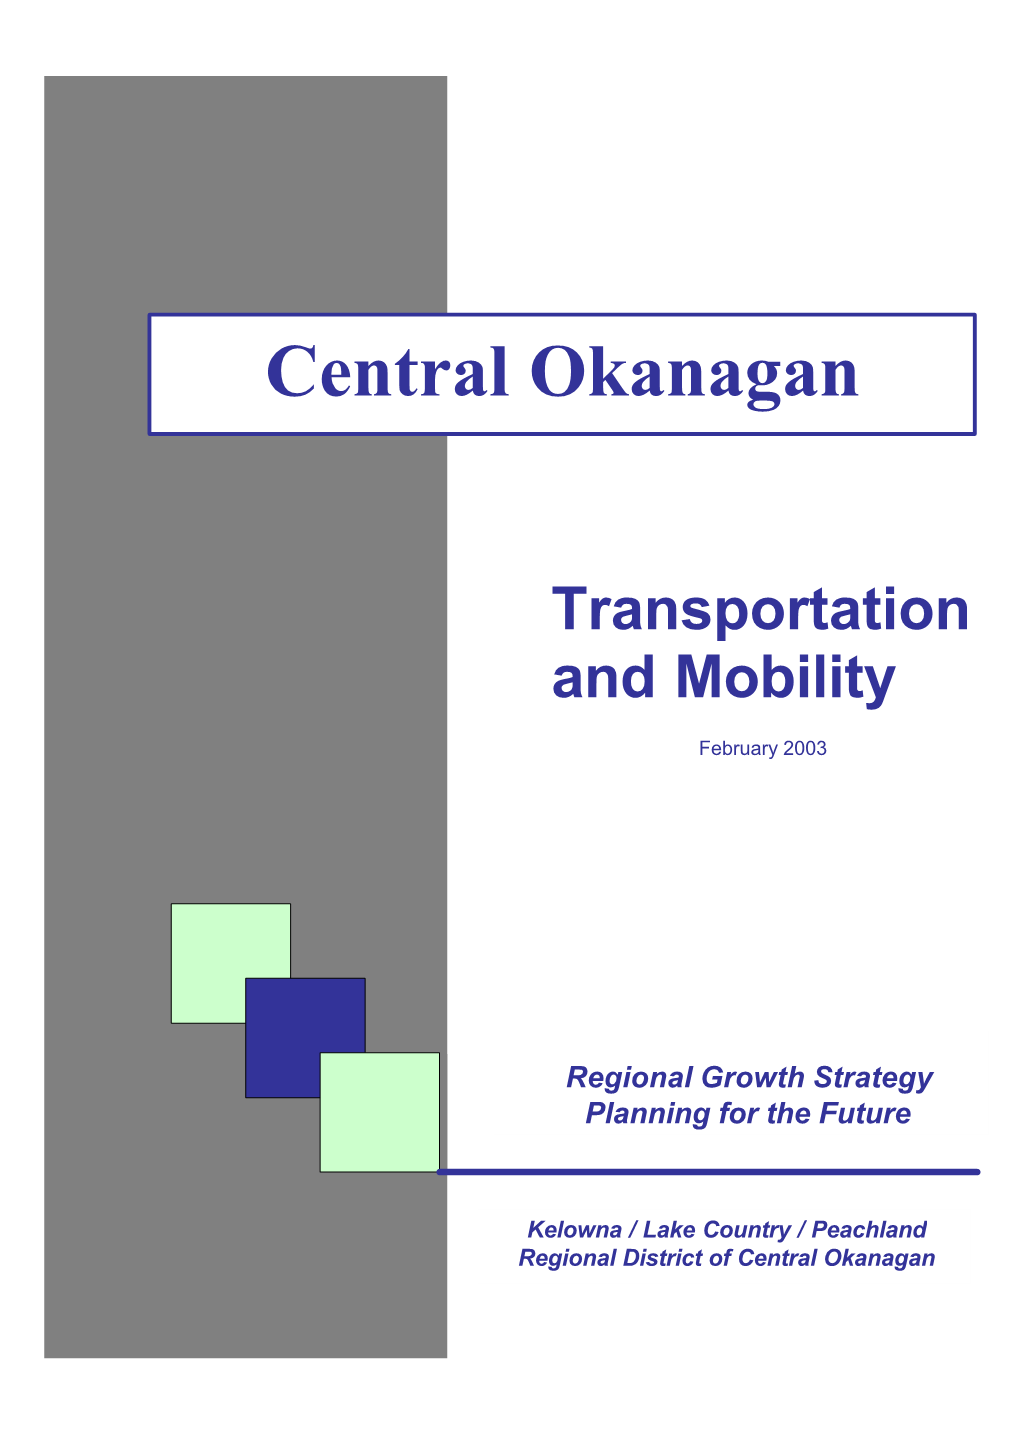 Transportation and Mobility Feb 2003